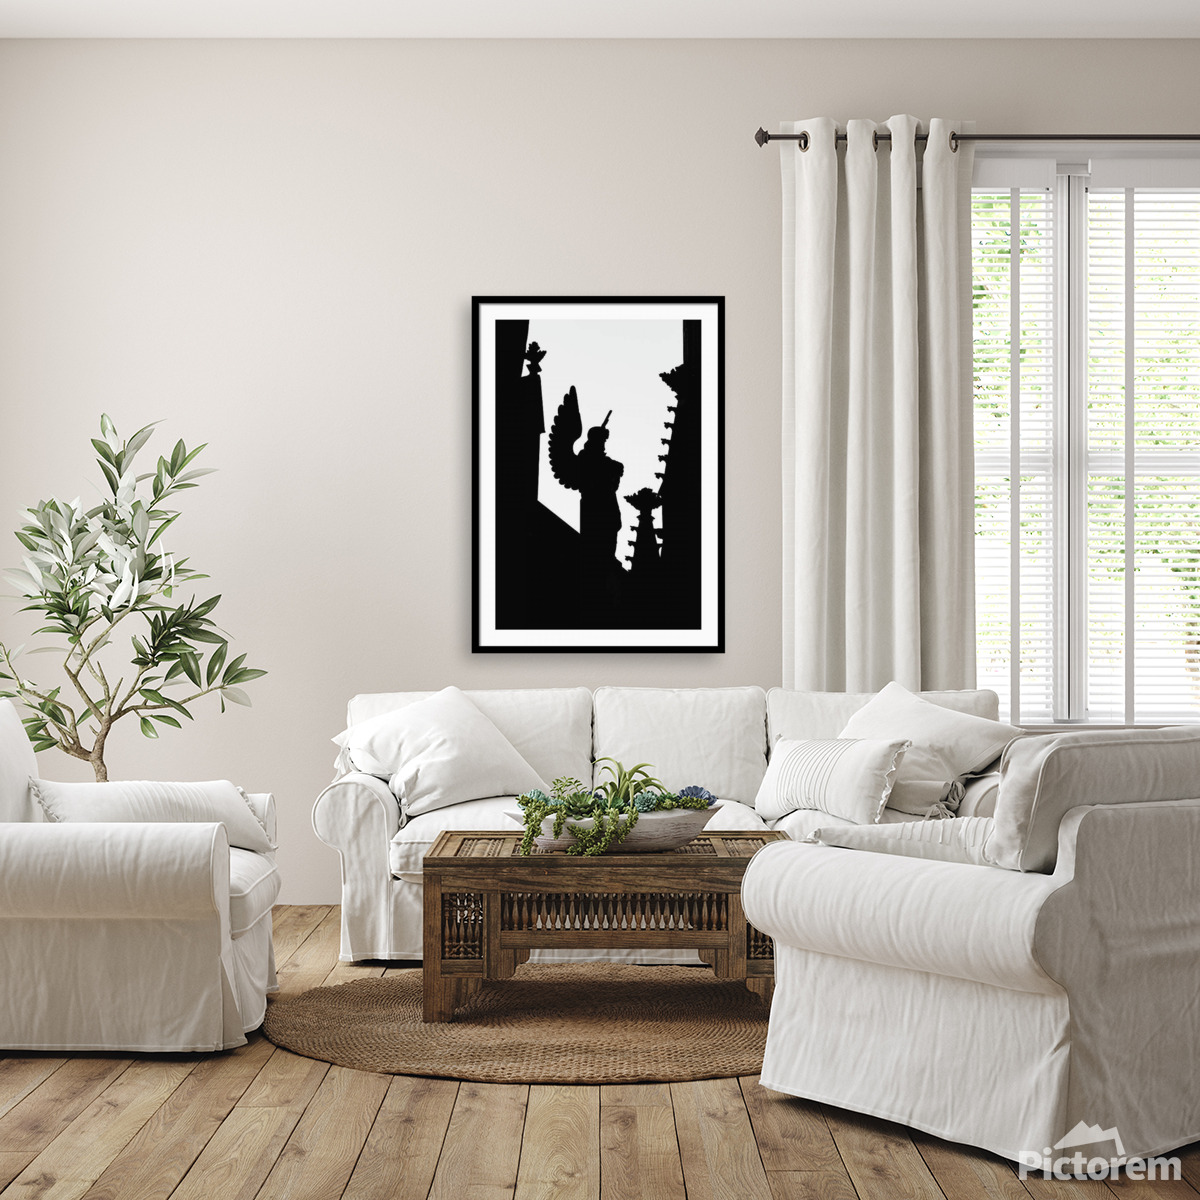 The Silhouette of an Angel - B&W Photography Print | Martin Vorel ...